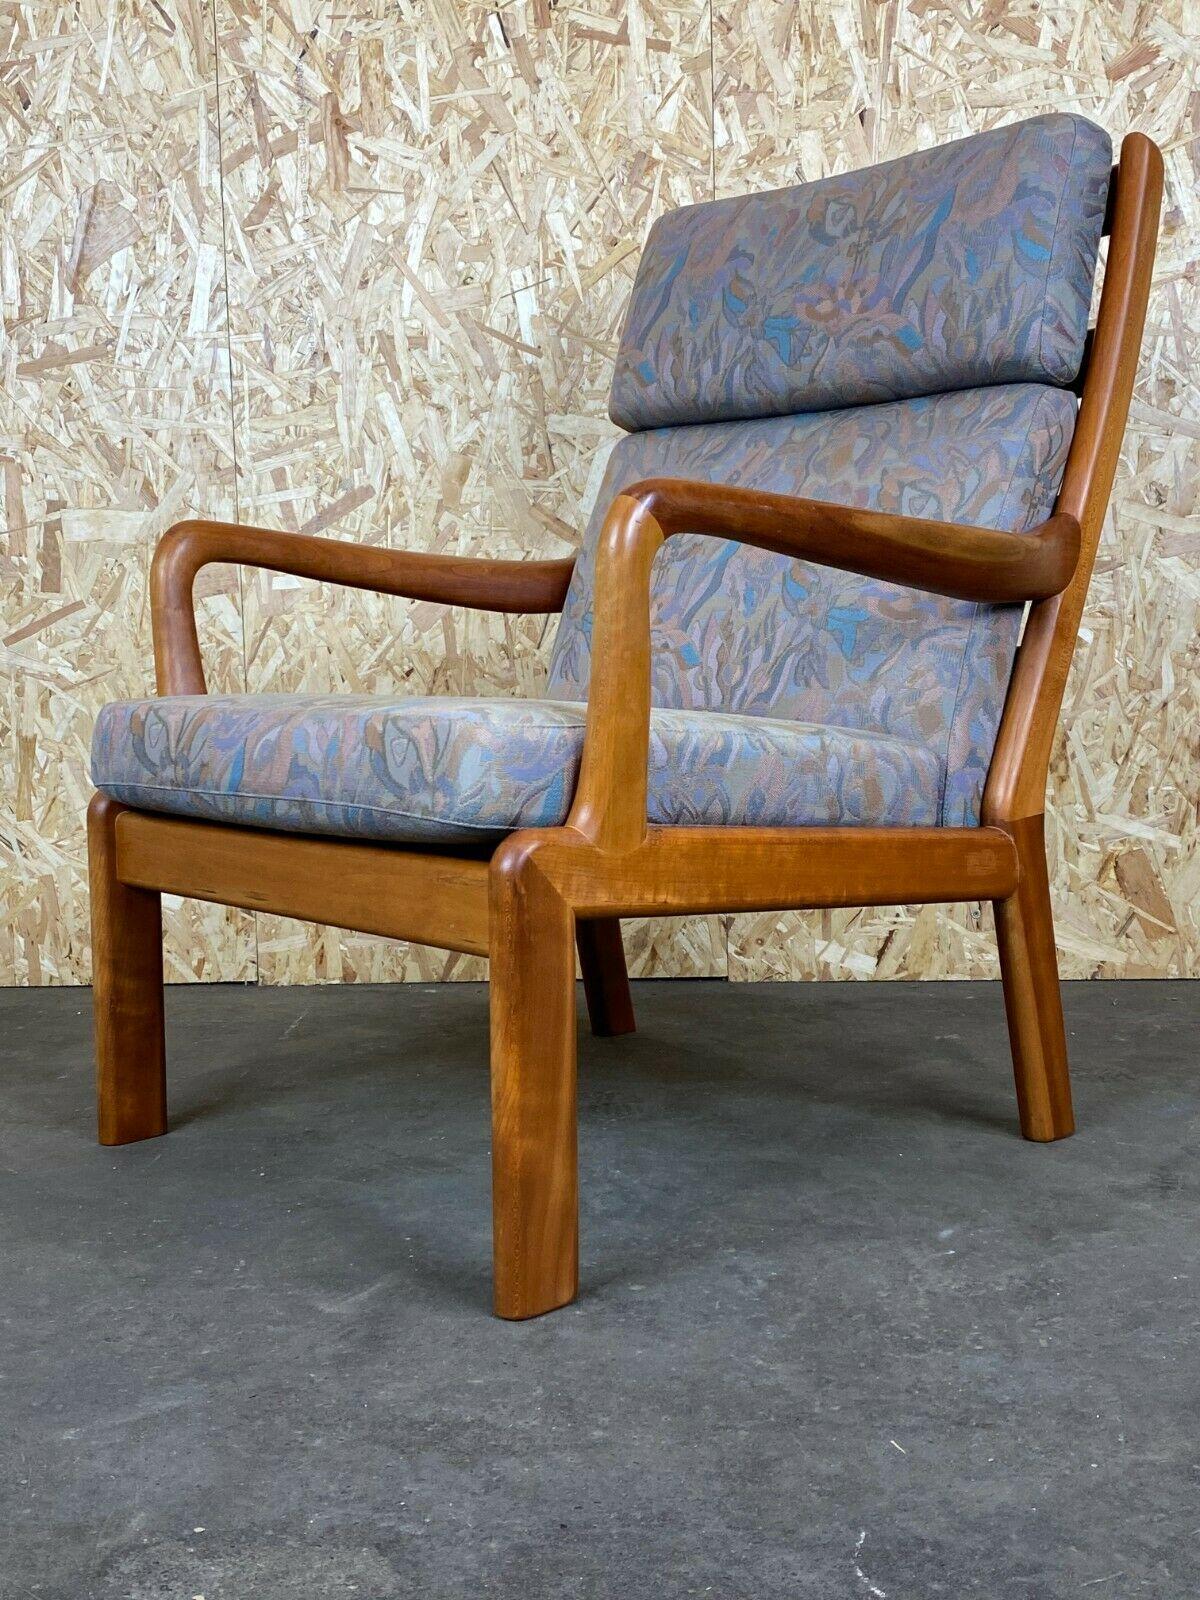 60s 70s Teak Easy Chair L. Olsen & Søn Danish Denmark Design 60s

Object: Easy Chair

Manufacturer: L. Olsen & Son

Condition: good

Age: around 1960-1970

Dimensions:

74cm x 85cm x 95cm
Seat height = 42cm

Other notes:

The